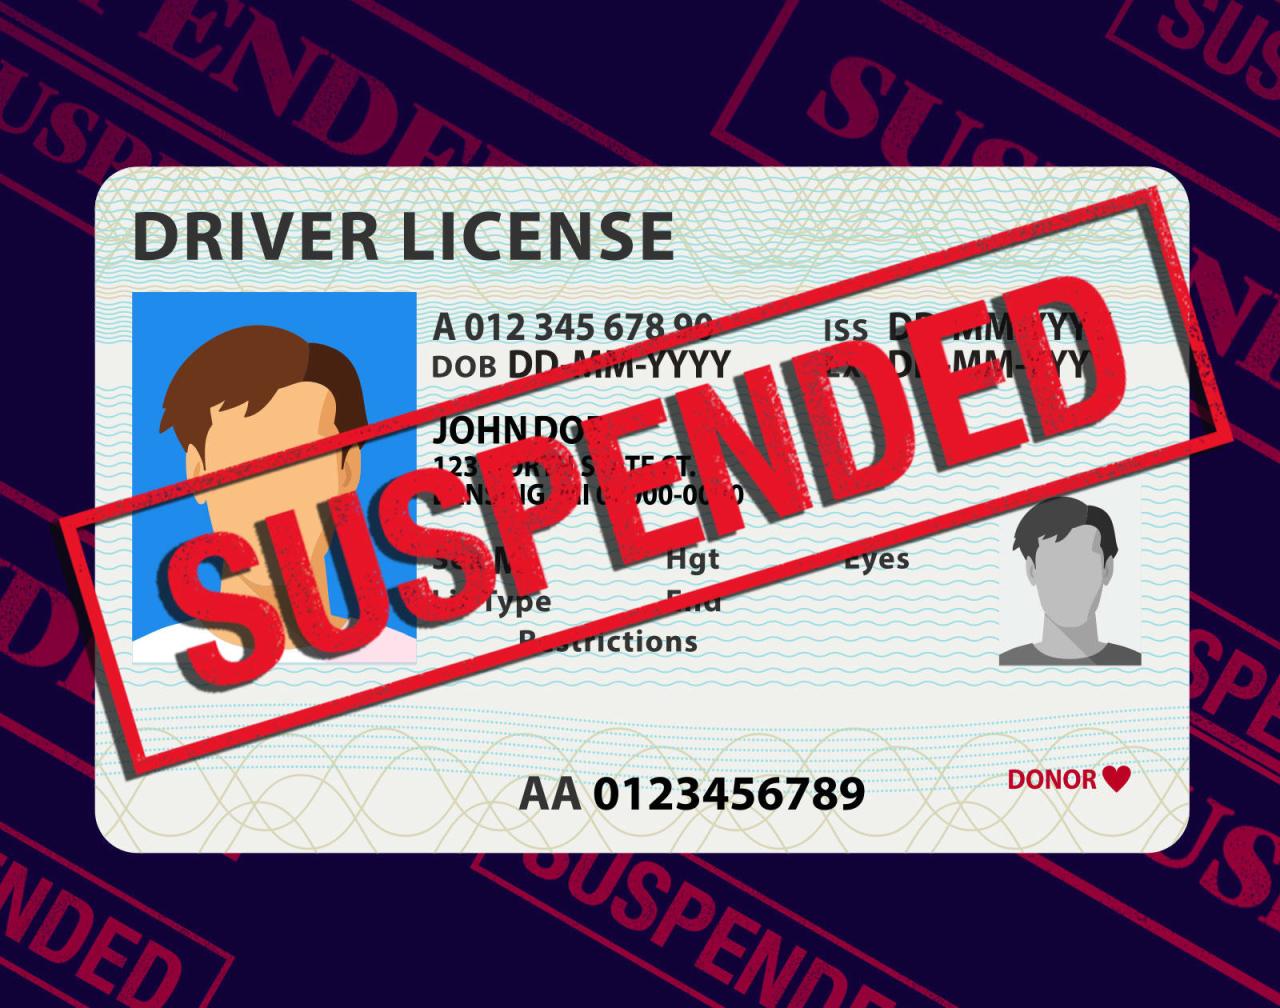 How to check if your license is suspended in california